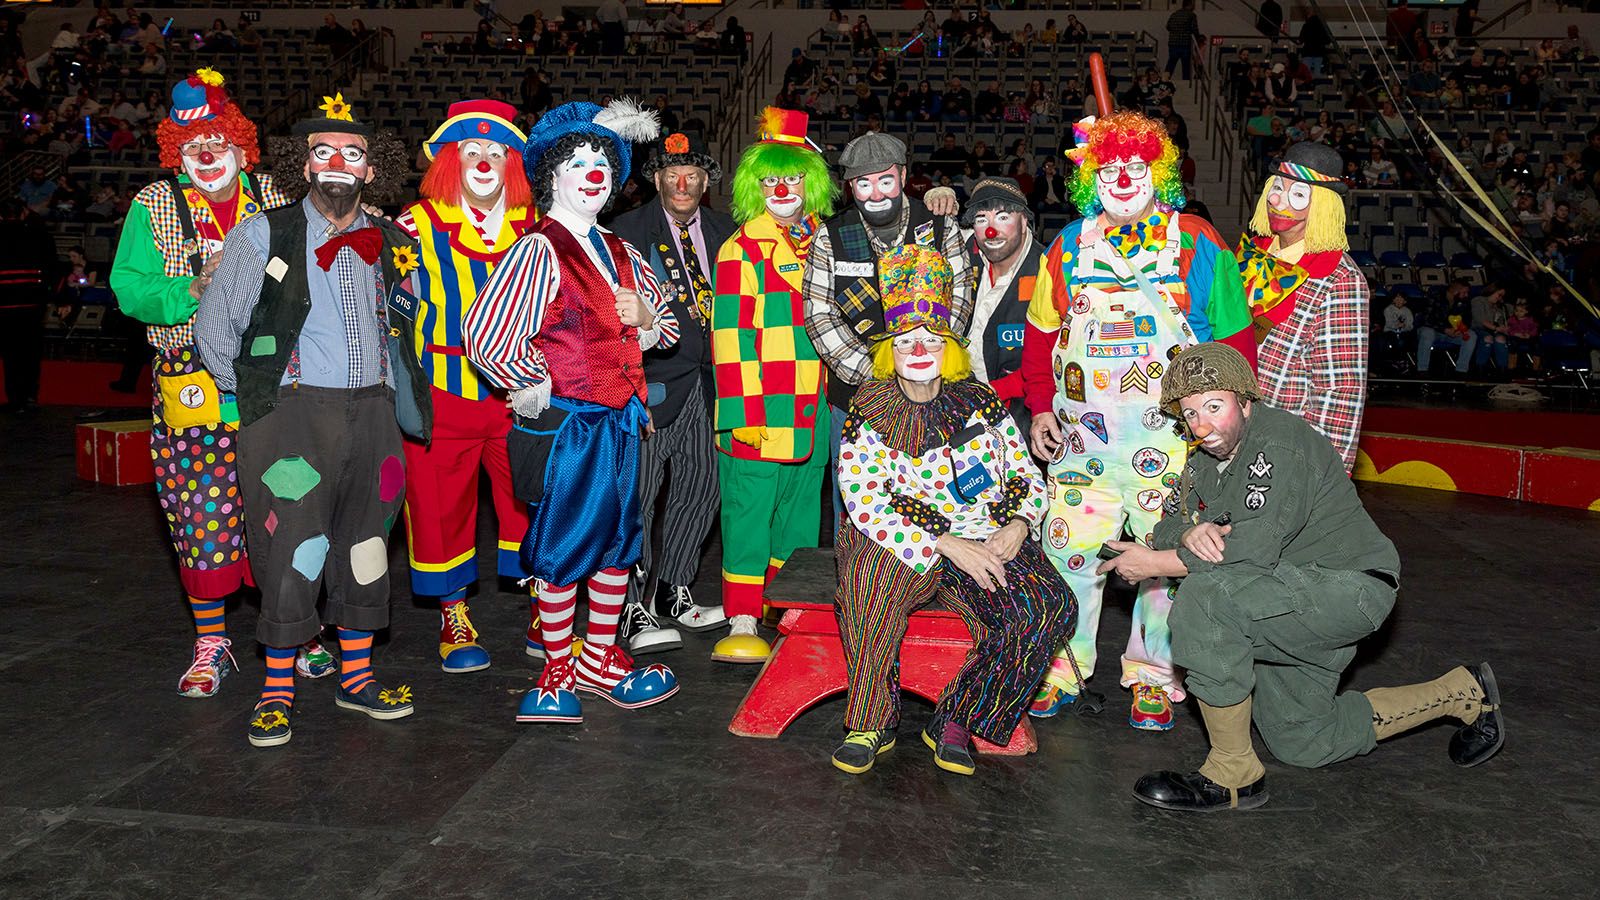 There will be clowns galore when the Mizpah Shrine Circus returns to Memorial Coliseum, Jan. 26-28.